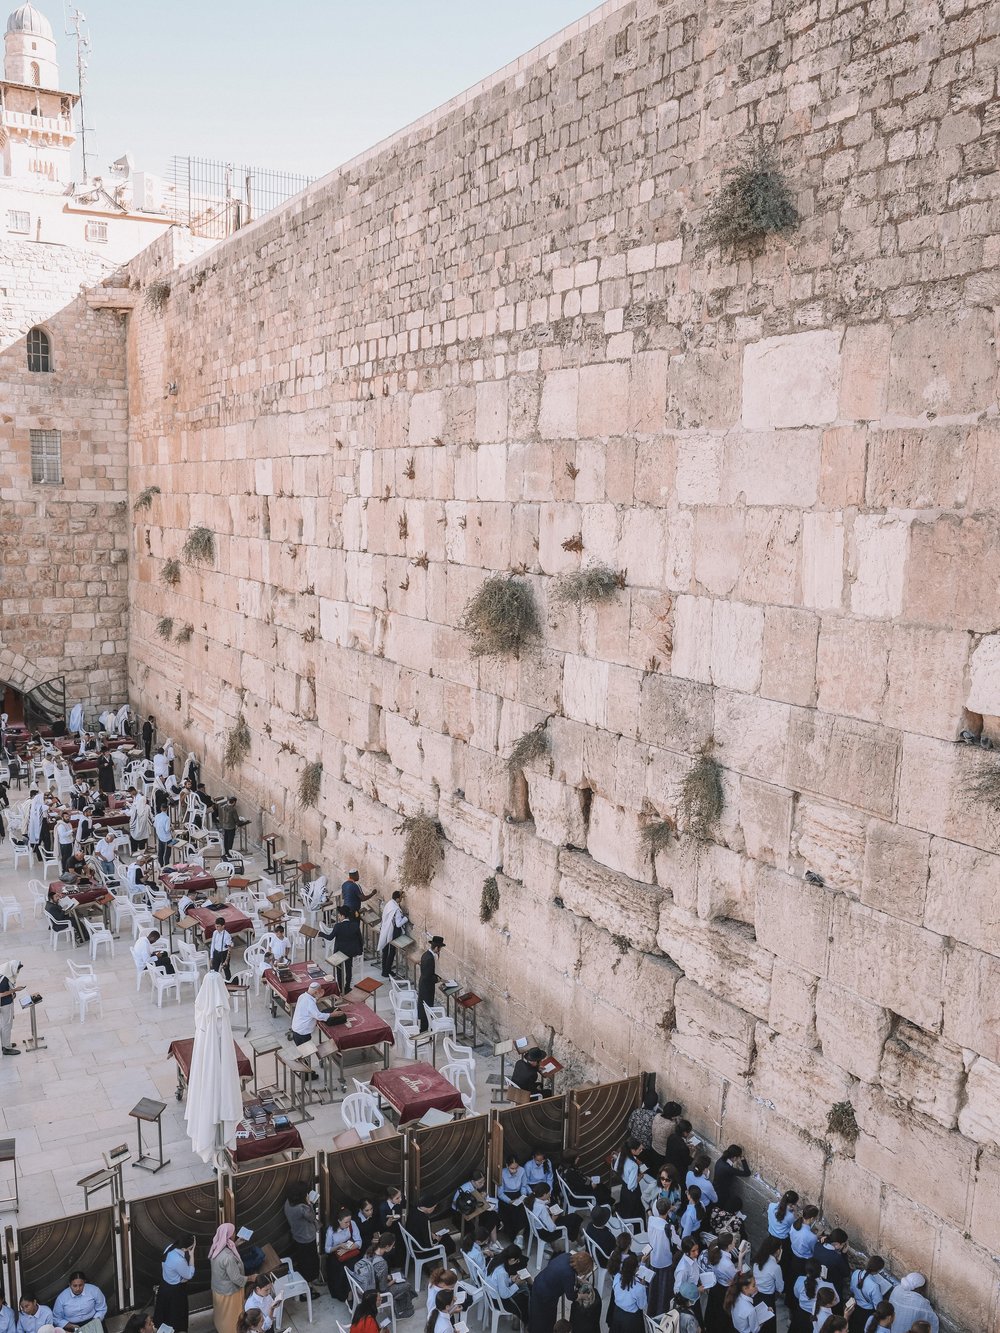 The Western Wall seen from above - Old Town - Jerusalem - Israel